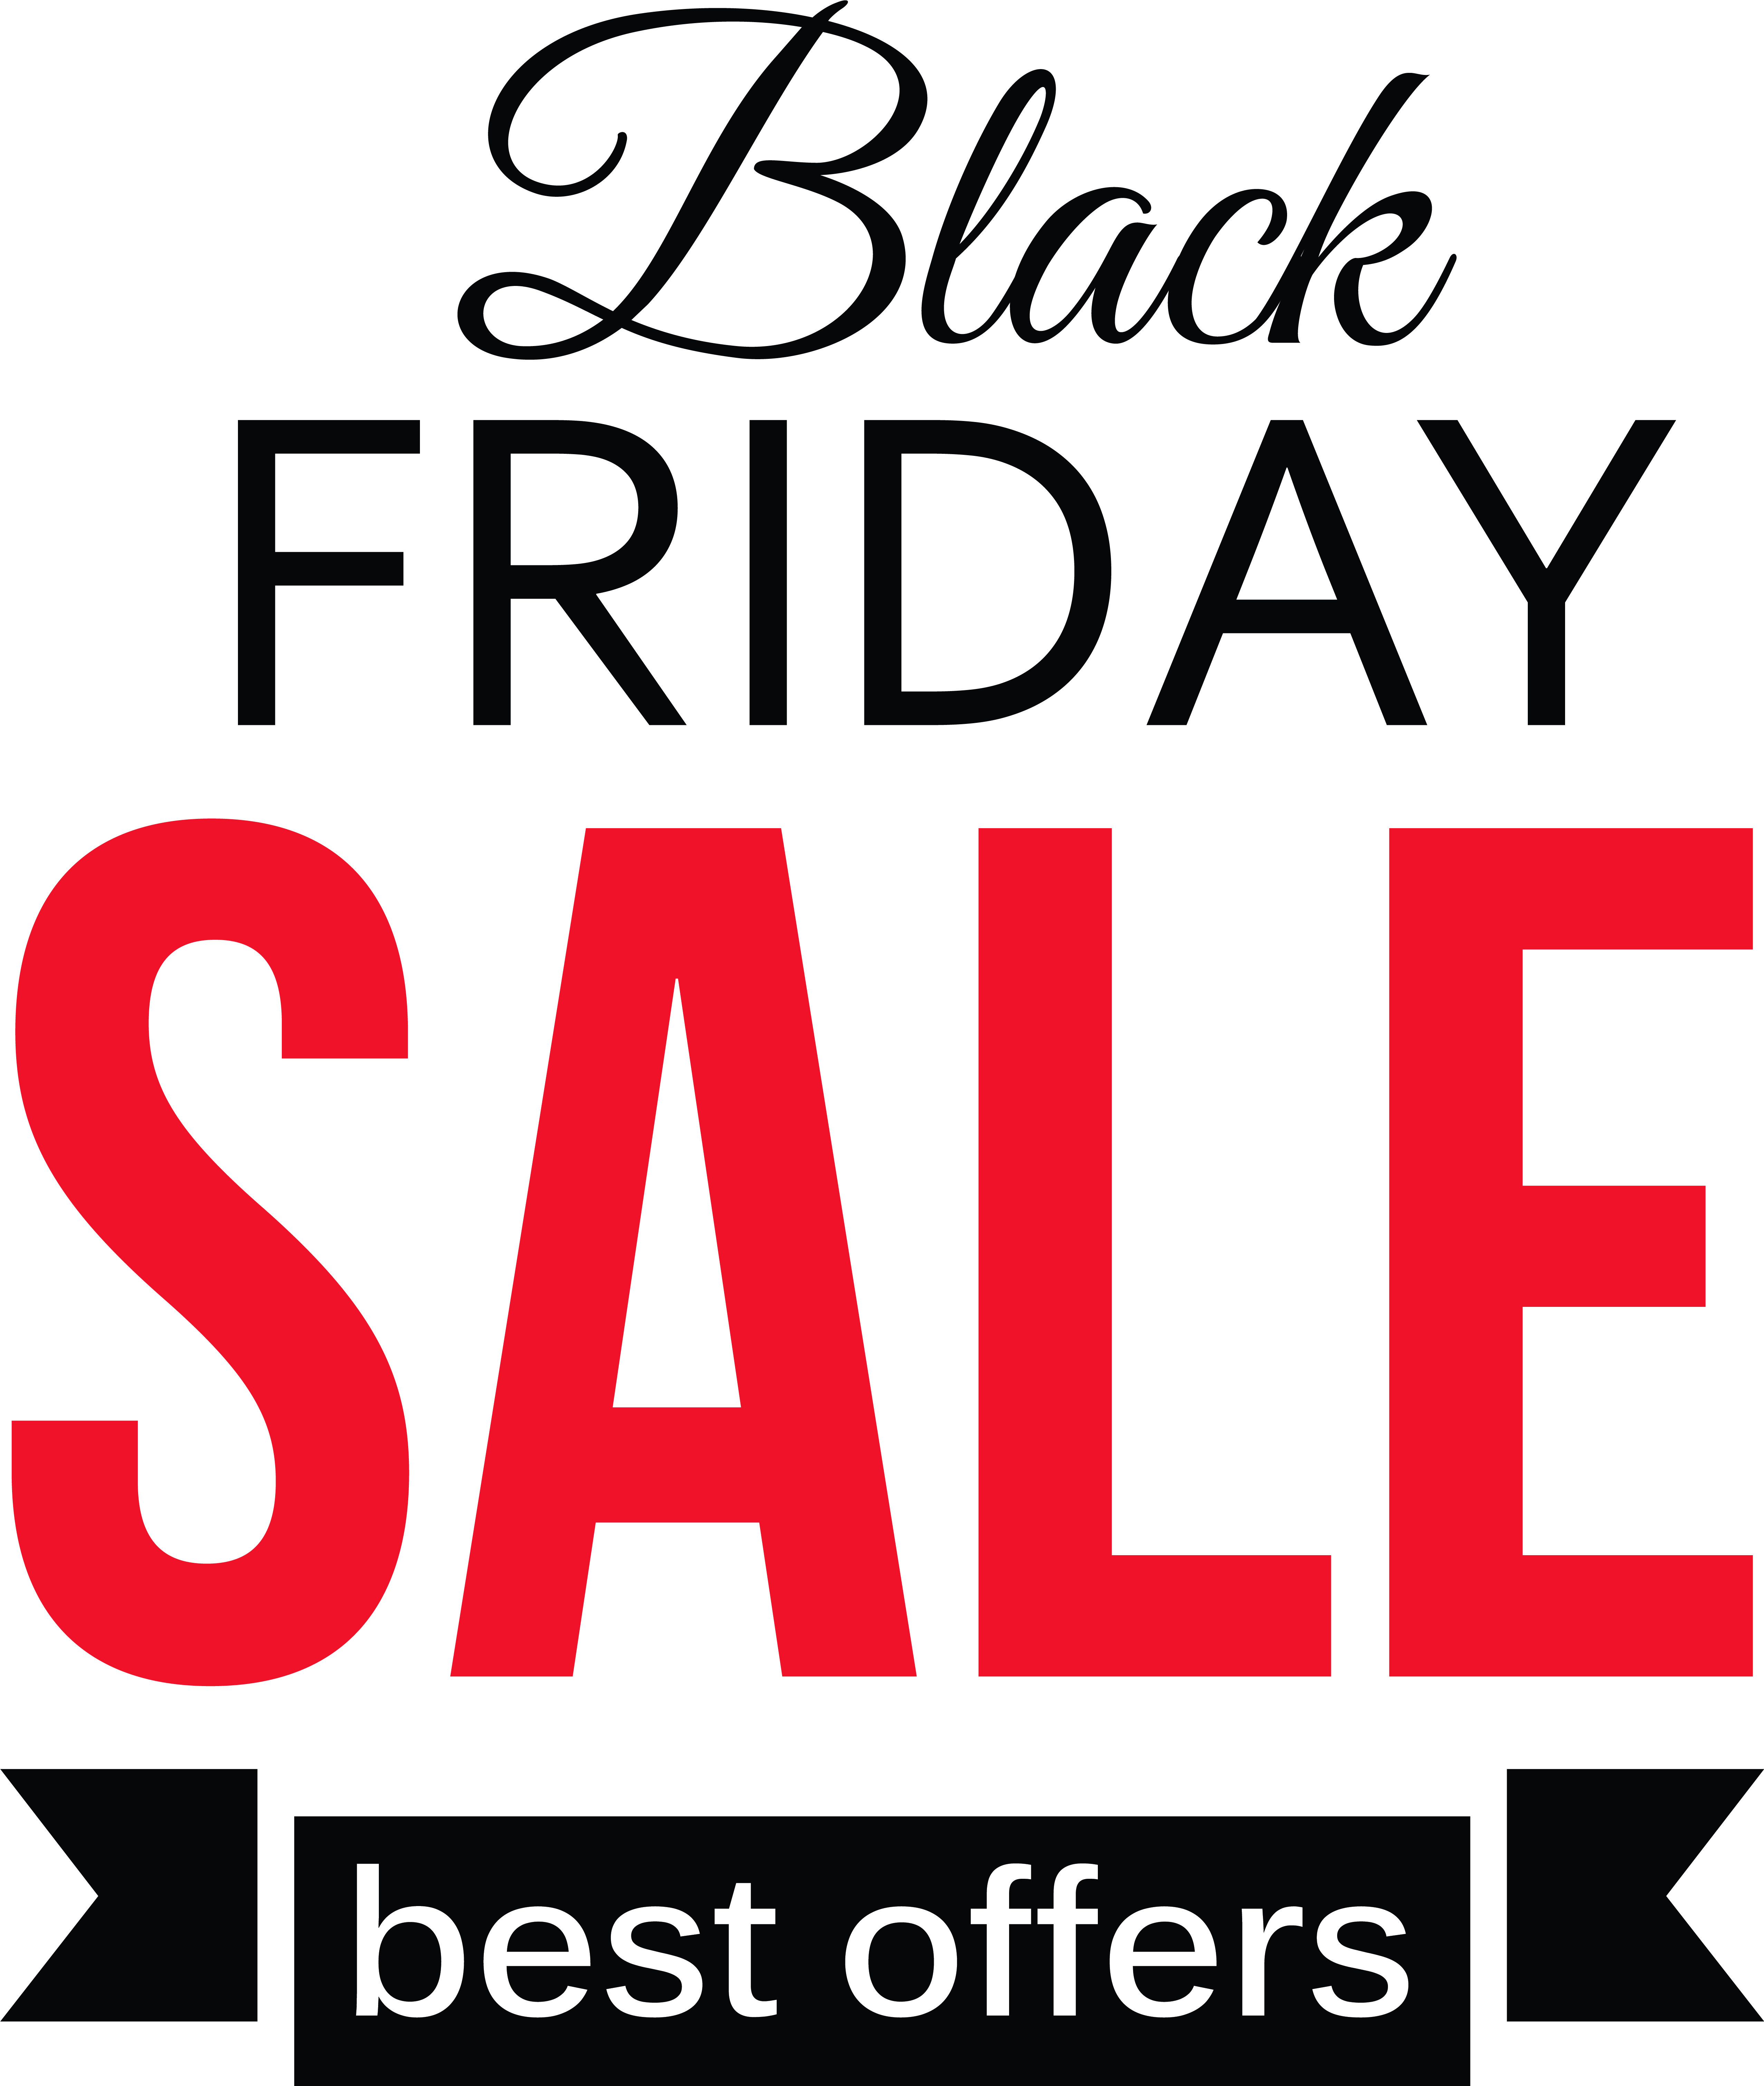 Black Friday Sale Best Offers